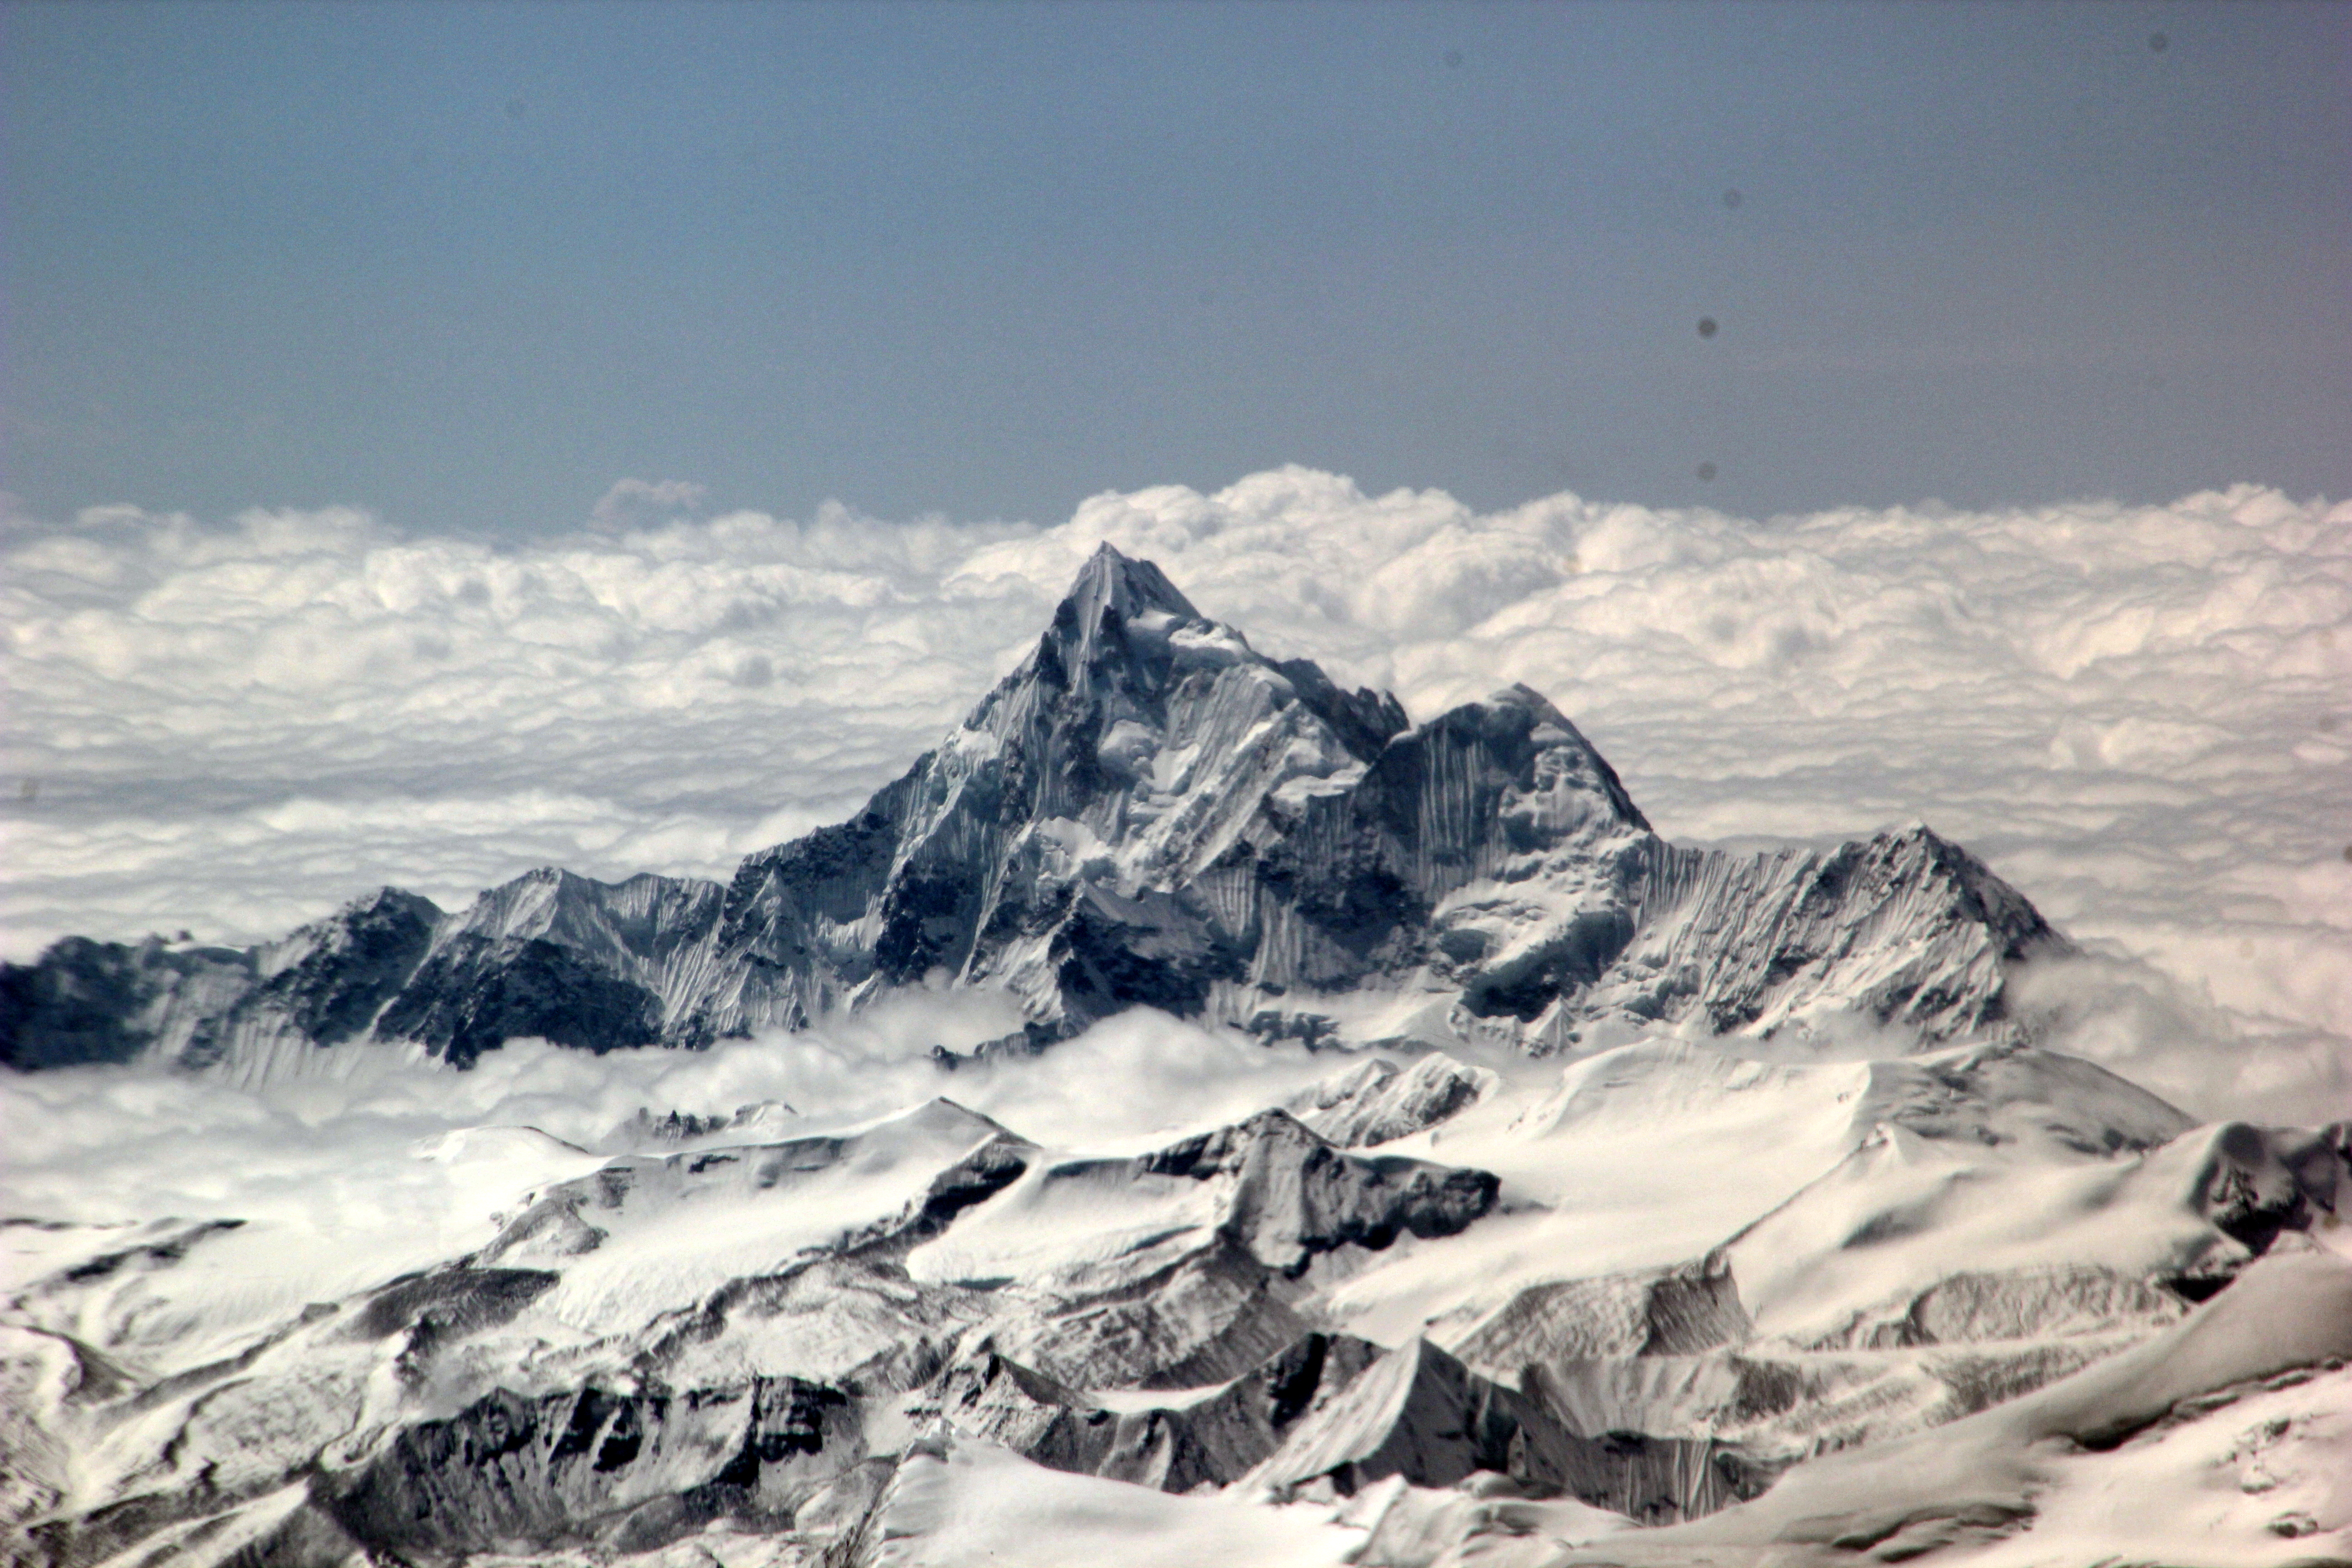 Everest from the Tibetan side